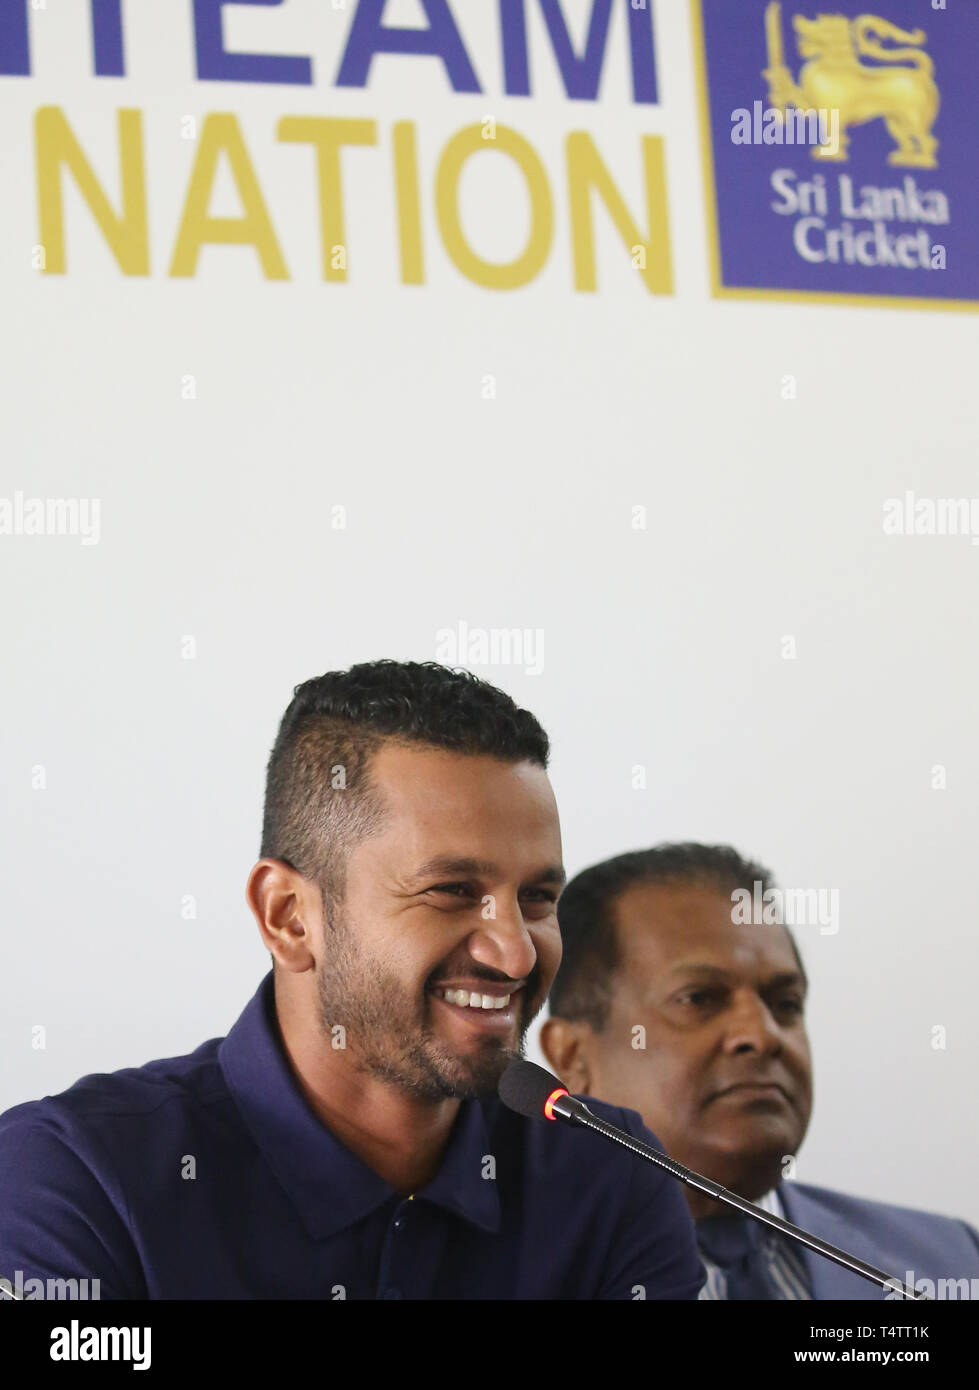 Colombo, Sri Lanka. 18th Apr, 2019. Sri Lanka's newly appointed captain for the ICC cricket World Cup, Dimuth Krunaratne speaks at a press conference in Colombo, Sri Lanka, Thursday, 18 April, 2019. Sri Lanka on April 18 dumped established stars including former captain Dinesh Chandimal from their one-day team in a mass clearout for the World Cup. Credit: Pradeep Dambarage/Pacific Press/Alamy Live News Stock Photo